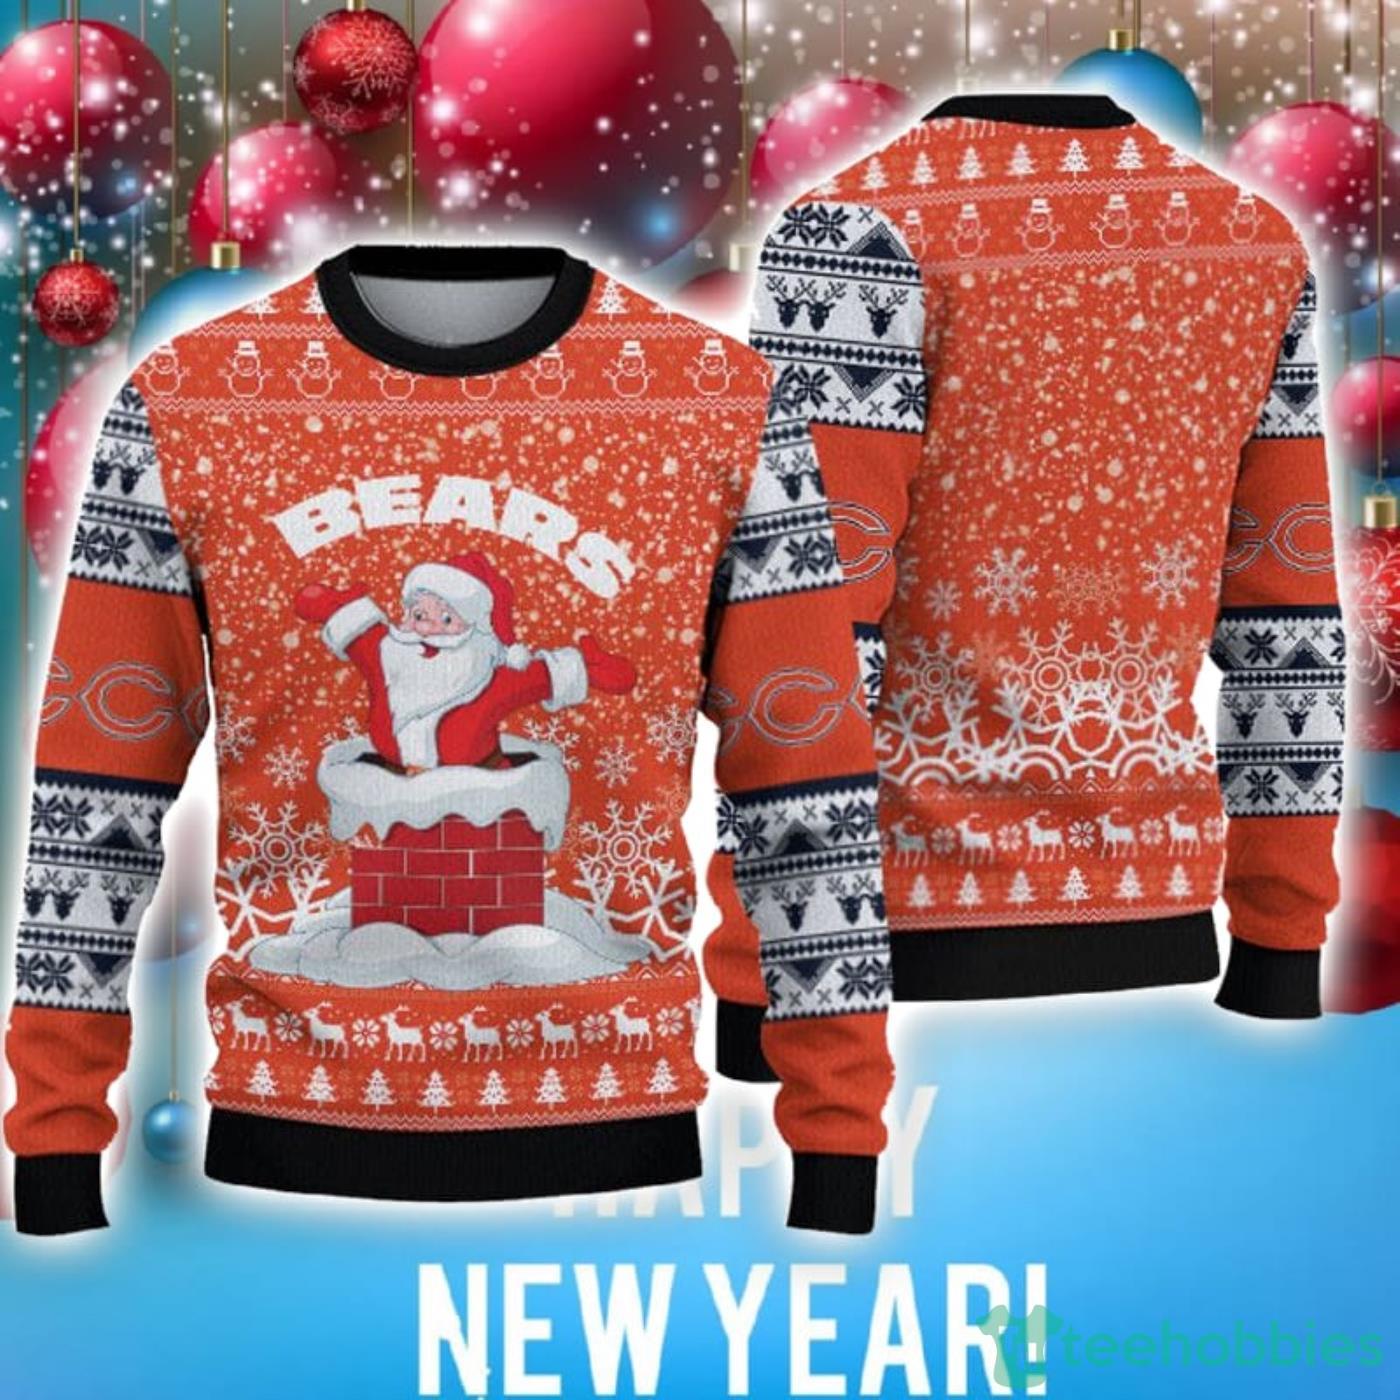 Chicago Bears Christmas Santa Claus Pattern Special Trend Ugly Christmas Sweater Product Photo 1